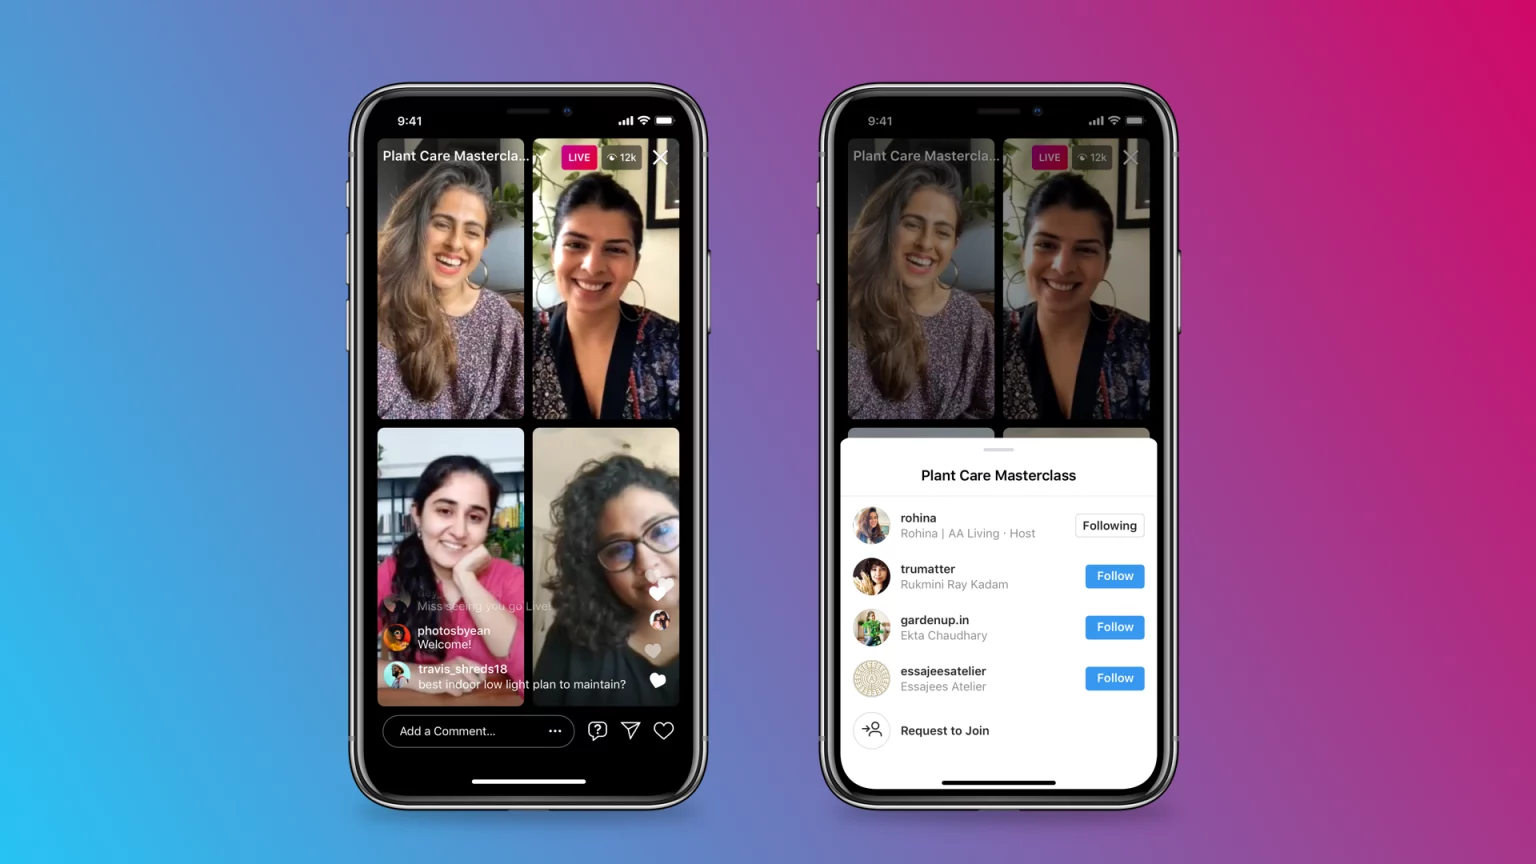 Instagram Launches Live Rooms For Live Broadcasts With Up To Four Creators, Up From Two, And Says It Will Roll Out New Audio Features In Coming Months (Sarah Perez/TechCrunch)